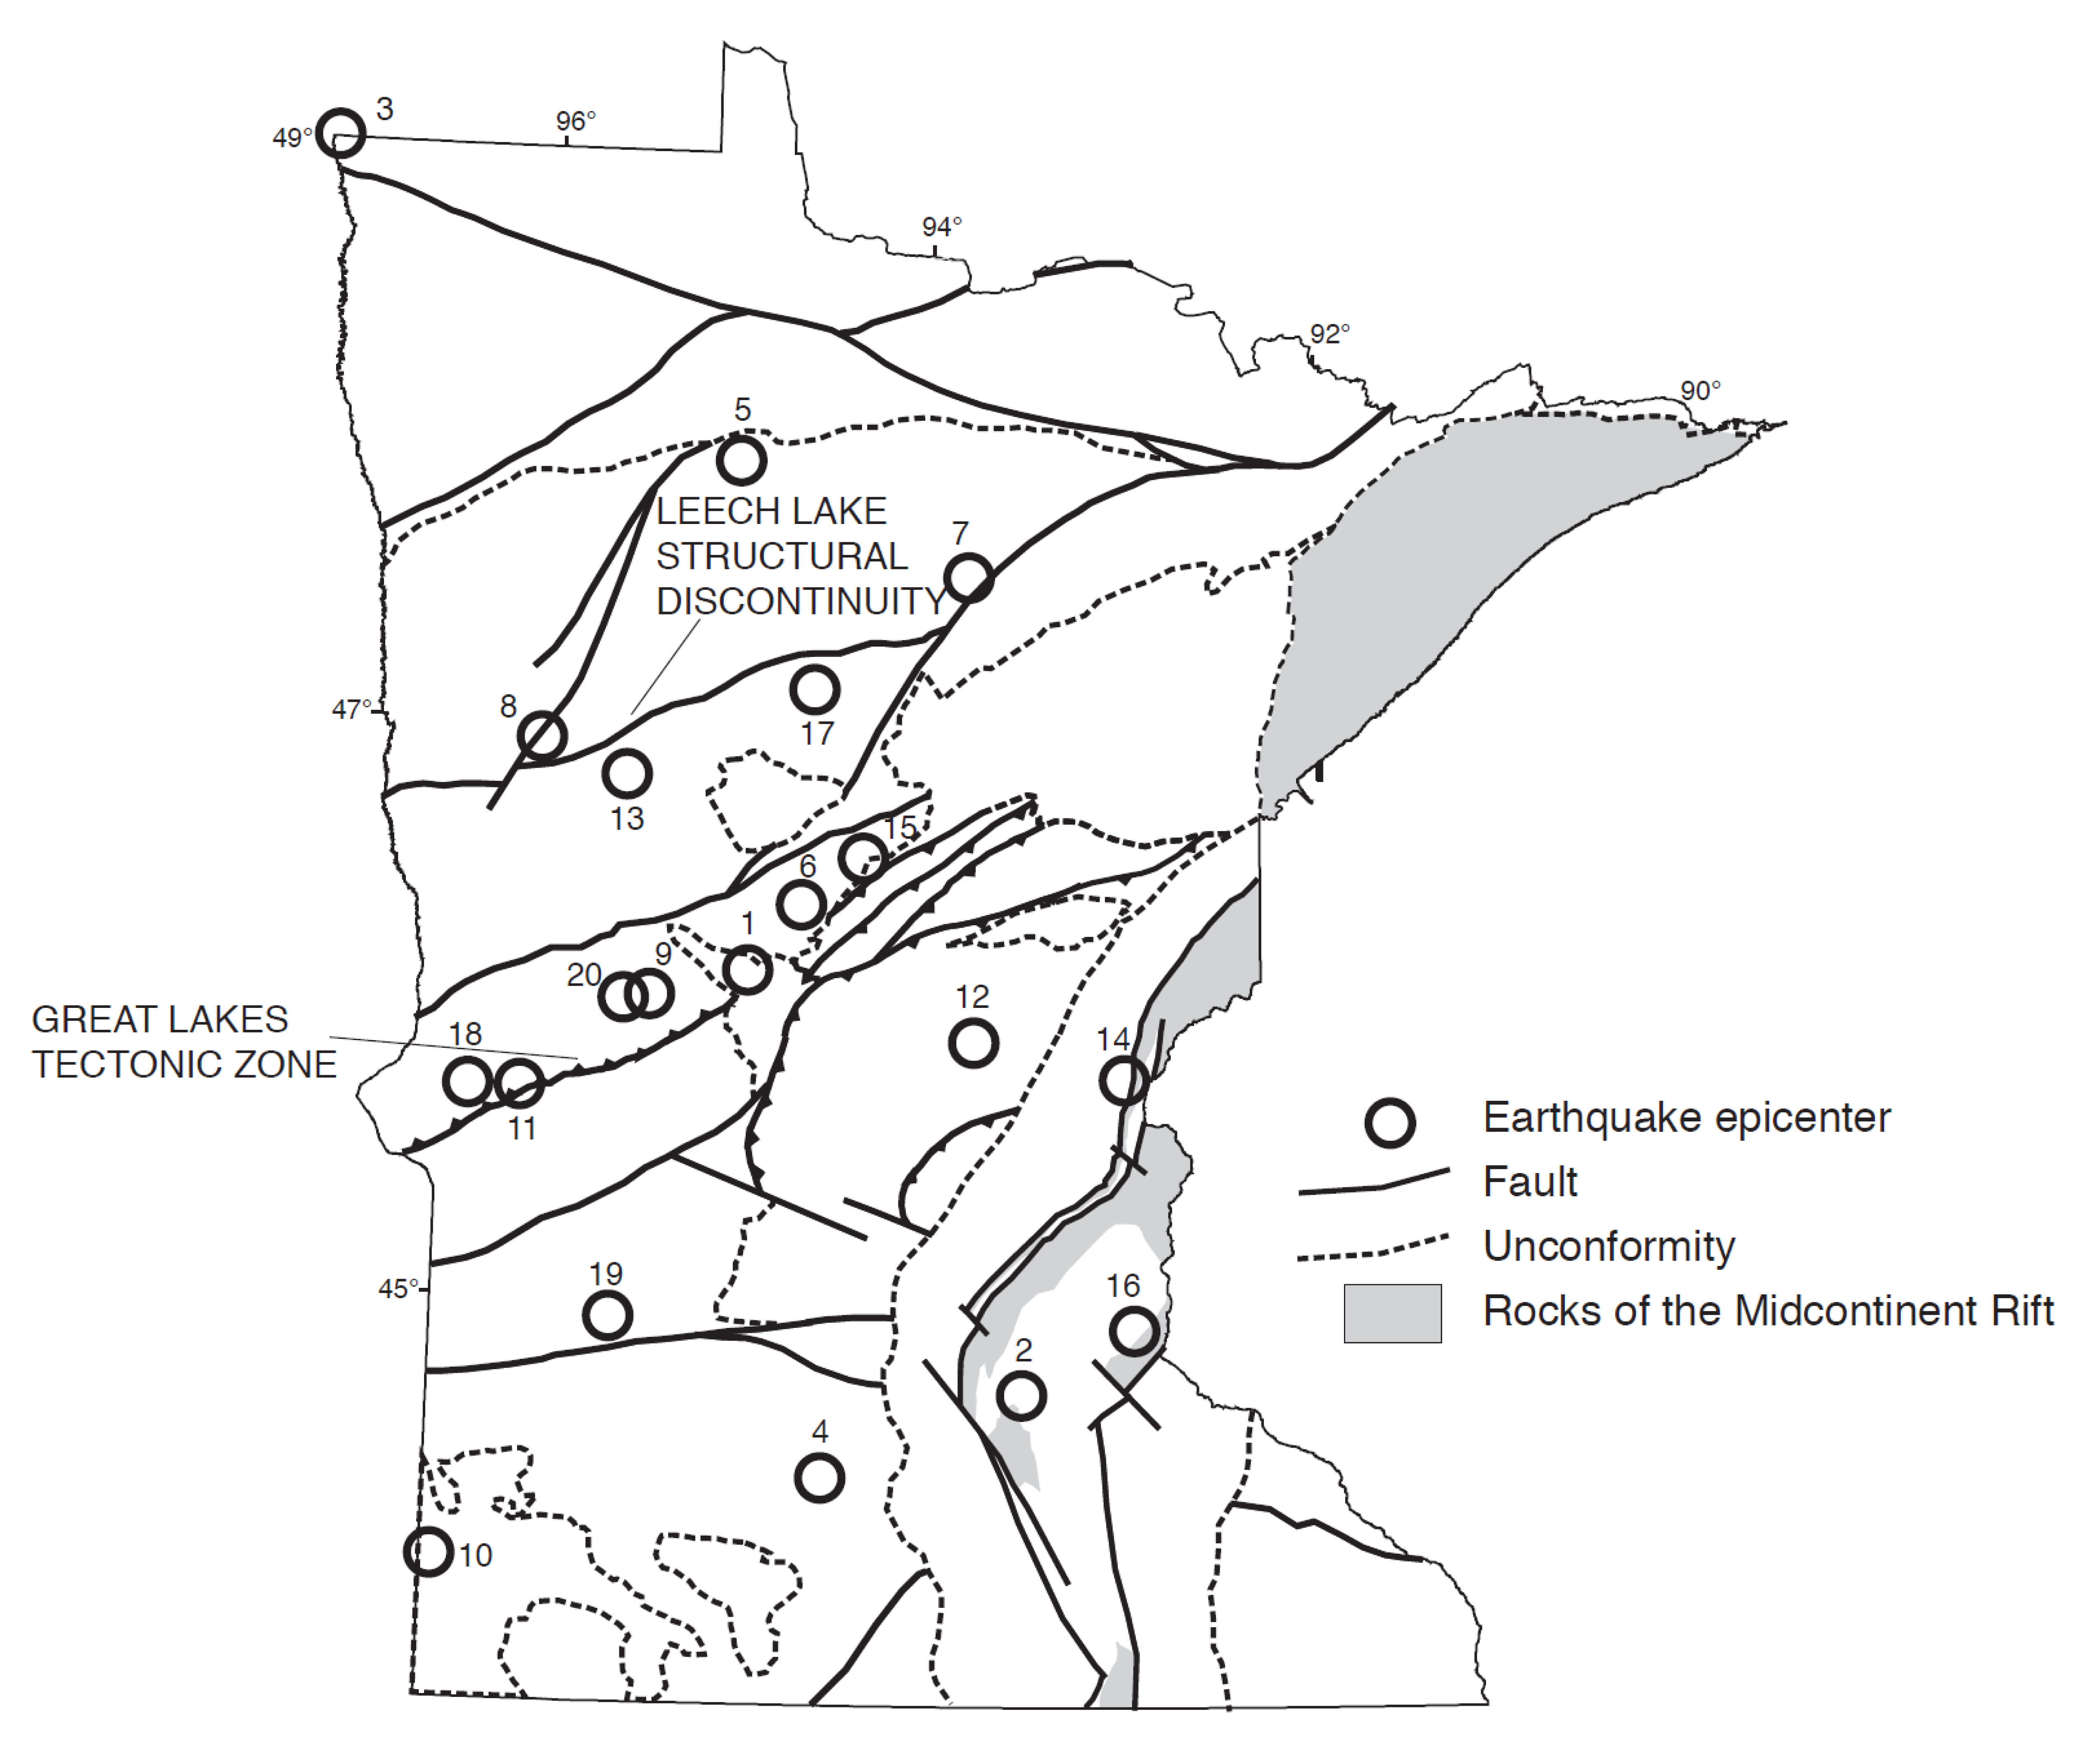 Epicenter locations of Minnesota earthquakes superimposed on a geologic map of Precambrian bedrock. The numbers correspond to Table 1.